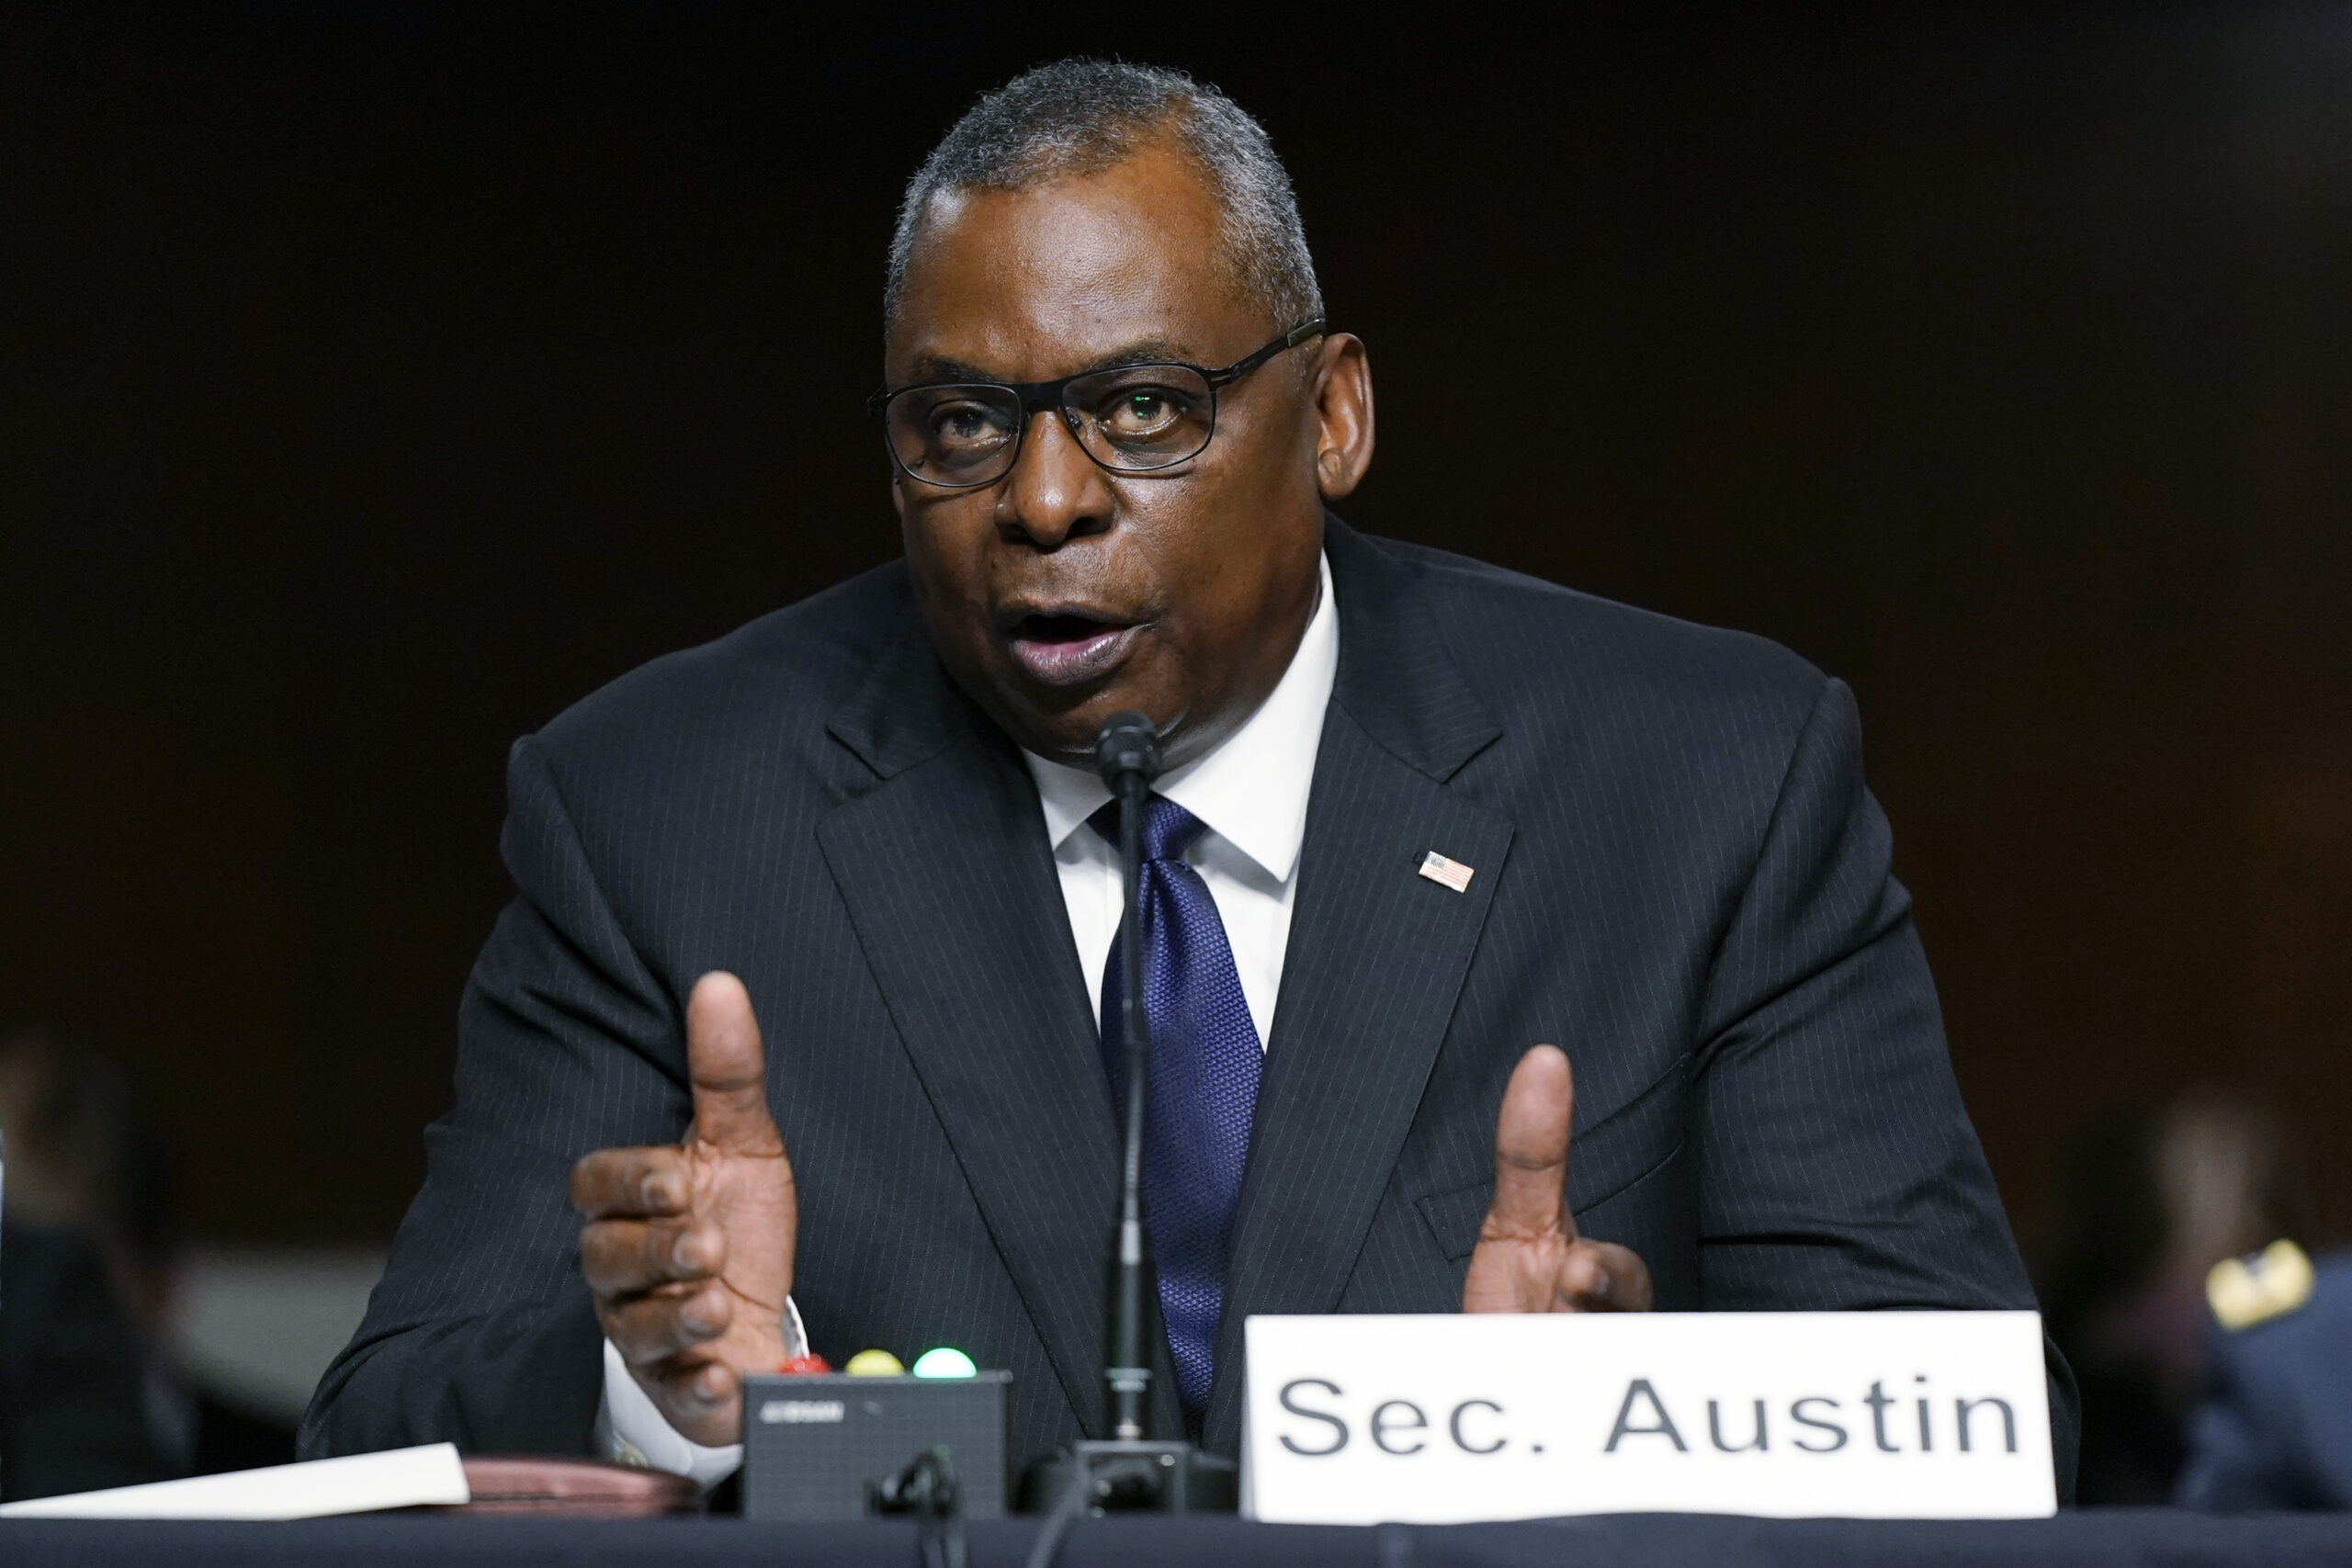 Defense Secretary Lloyd Austin speaks during a Senate Armed Services Committee hearing on the conclusion of military operations in Afghanistan and plans for future counterterrorism operations, Tuesday, Sept. 28, 2021, on Capitol Hill in Washington. (AP Photo/Patrick Semansky, Pool)